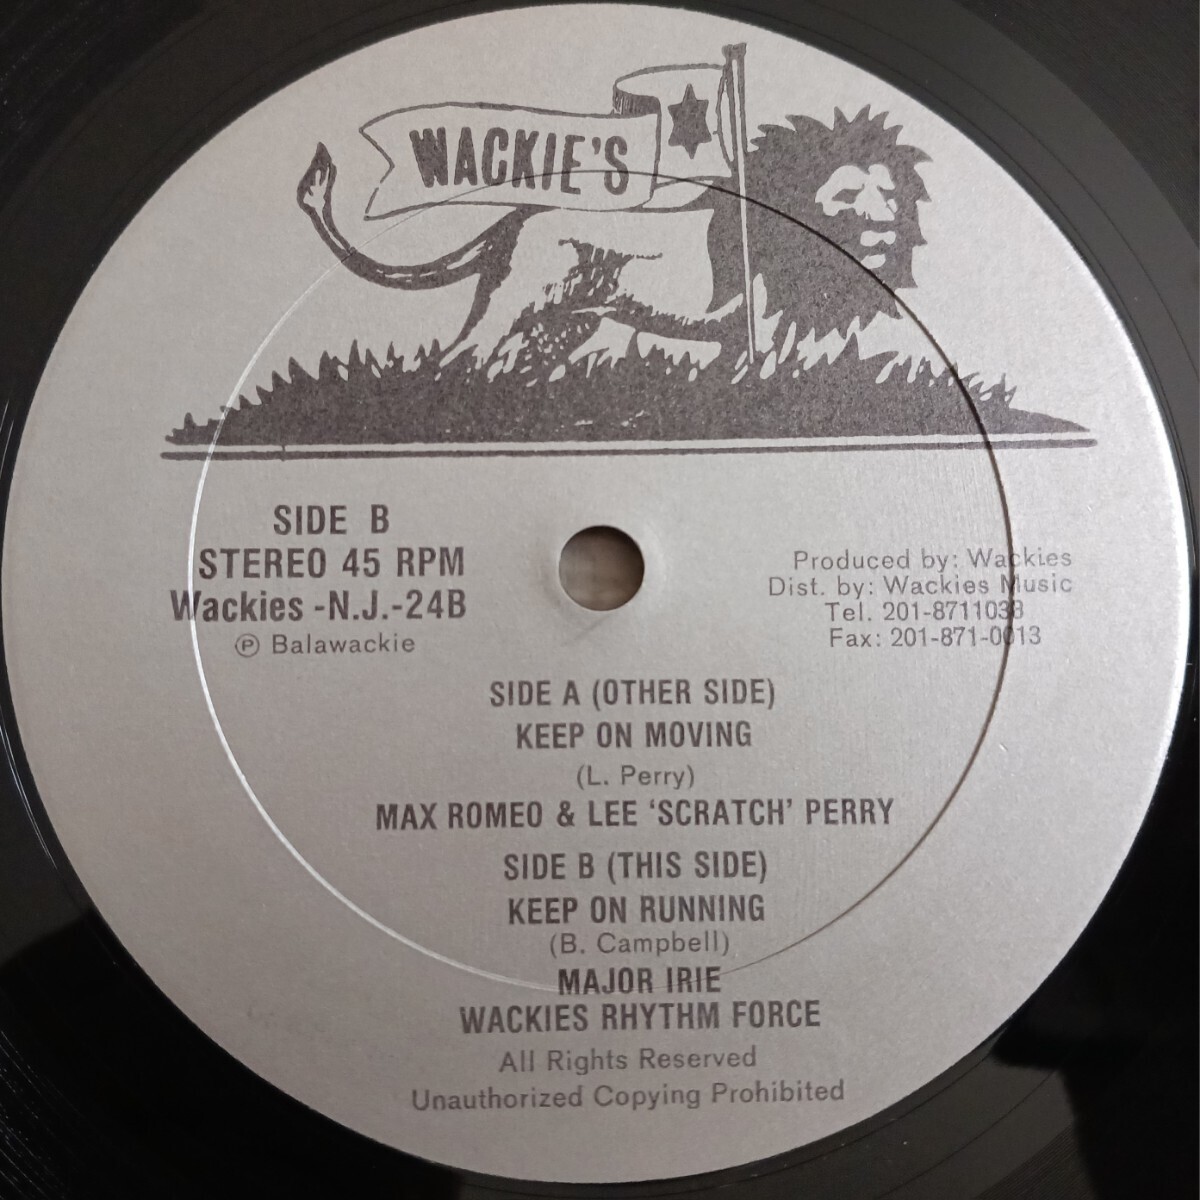 MAX ROMEO & LEE SCRATCH PERRY『KEEP ON MOVING』輸入盤１２インチシングルレコード / リー・ペリー / WACKIE'S / ワッキーズ_画像3